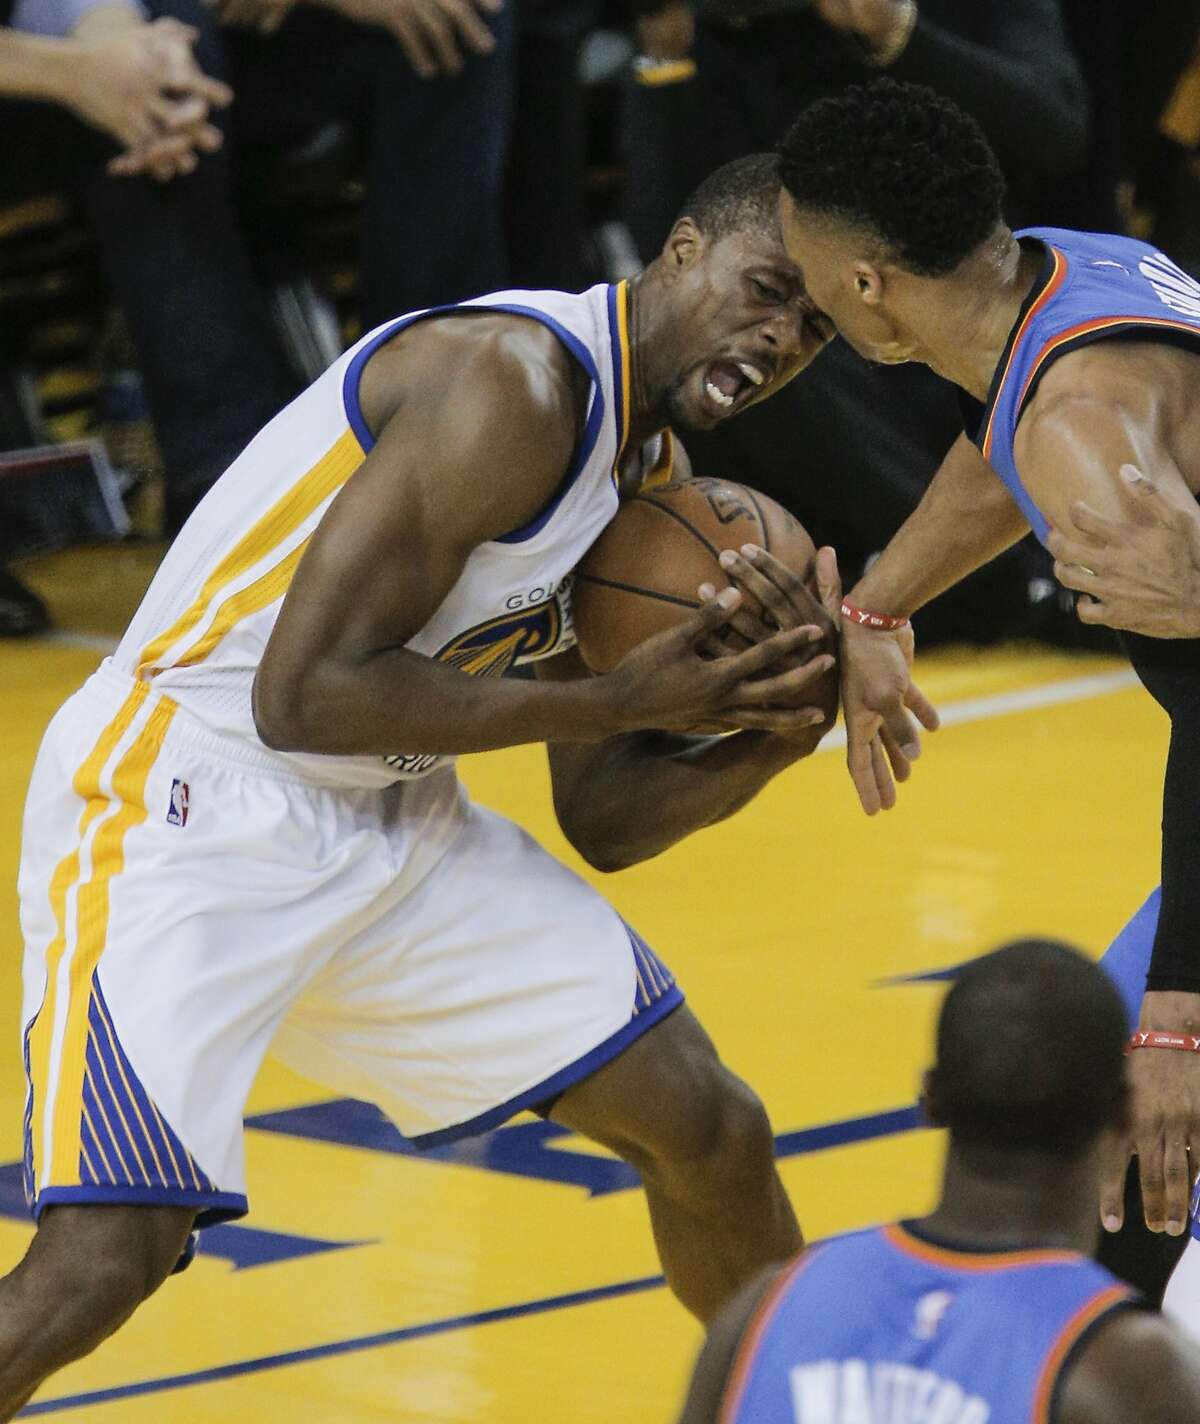 Golden State Warriors� Harrison Barnes fights Oklahoma City Thunders� Russell Westbrook for a rebound in the first quarter during Game 2 of the NBA Western Conference Finals at Oracle Arena on Wednesday, May 18, 2016 in Oakland, Calif.